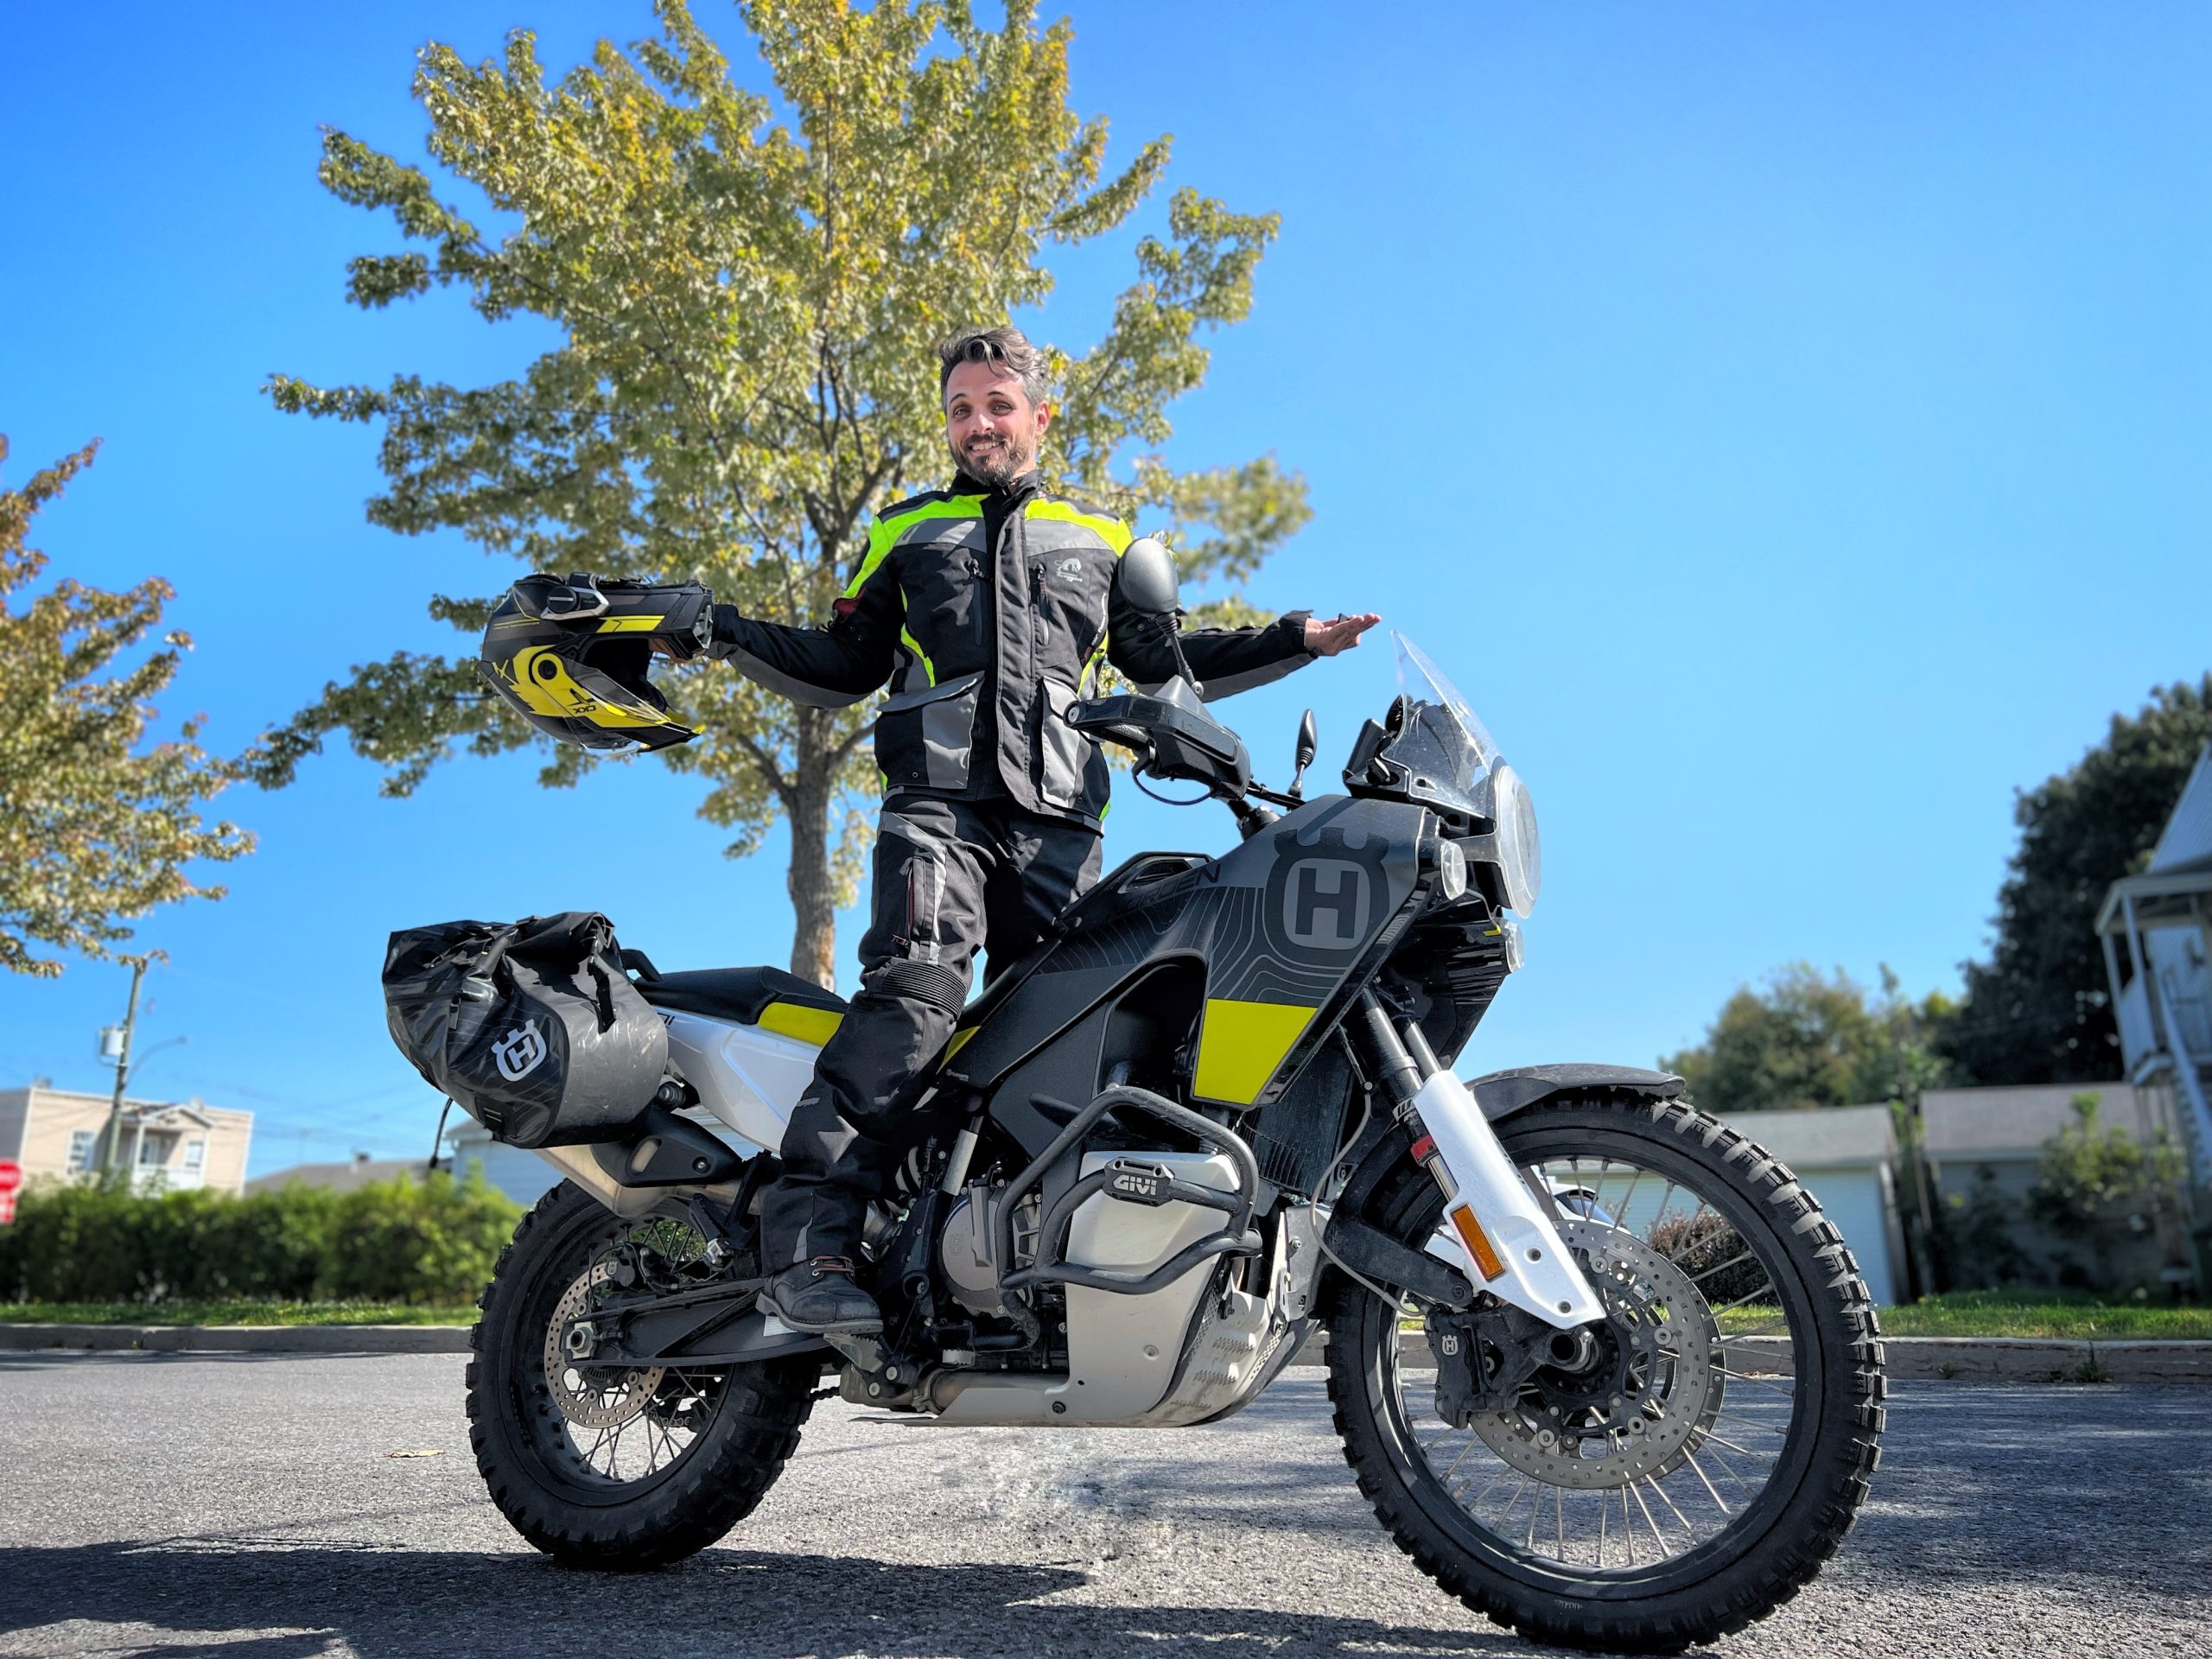 Let Me Ride Standing: The Challenge of Quebec’s Motorcycle Laws